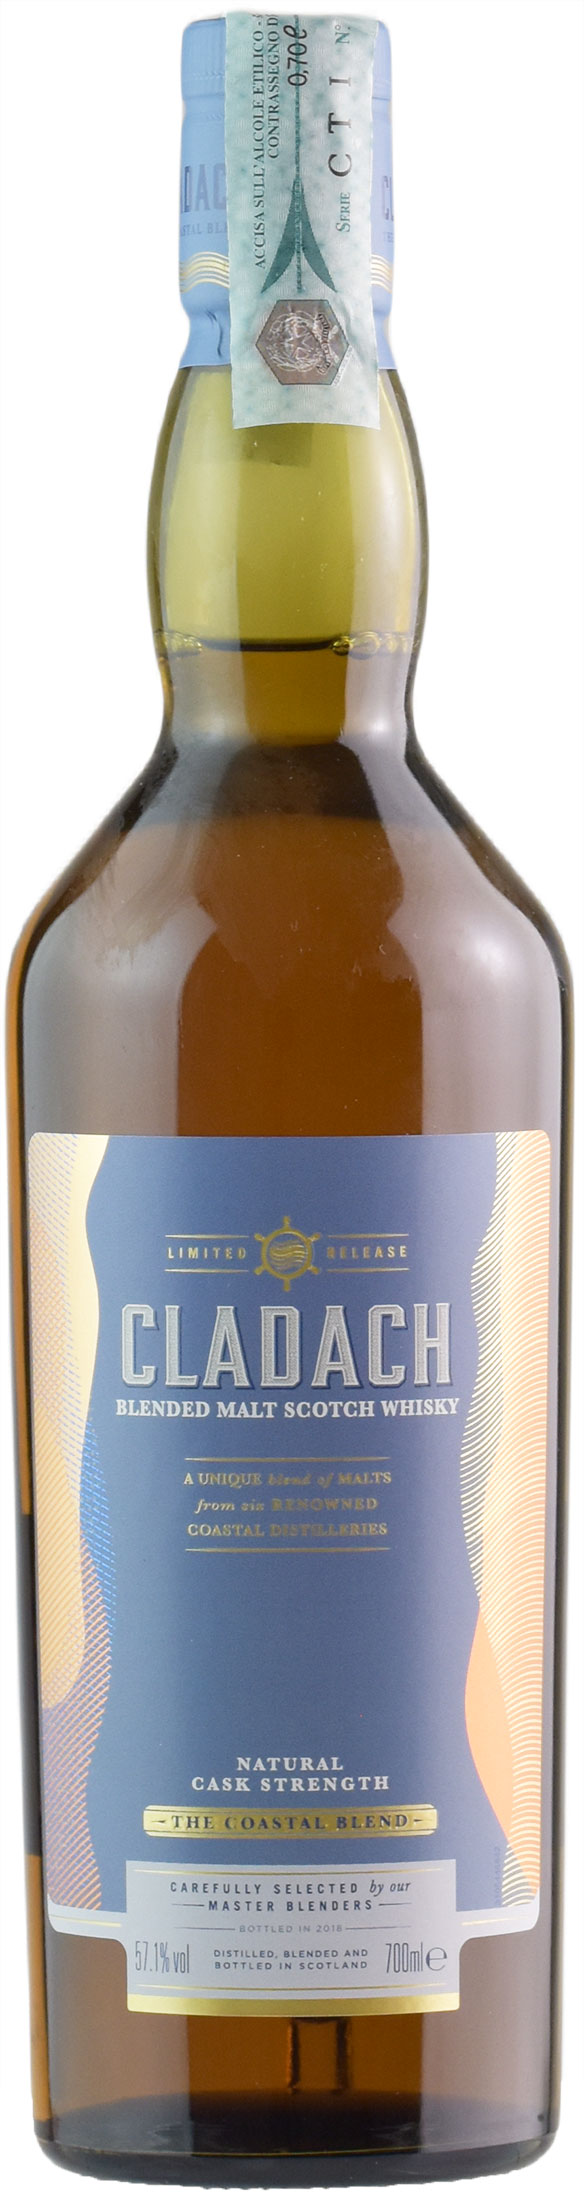 Cladach Blended Malt Scotch Whisky Natural Cask Strength Limited Release